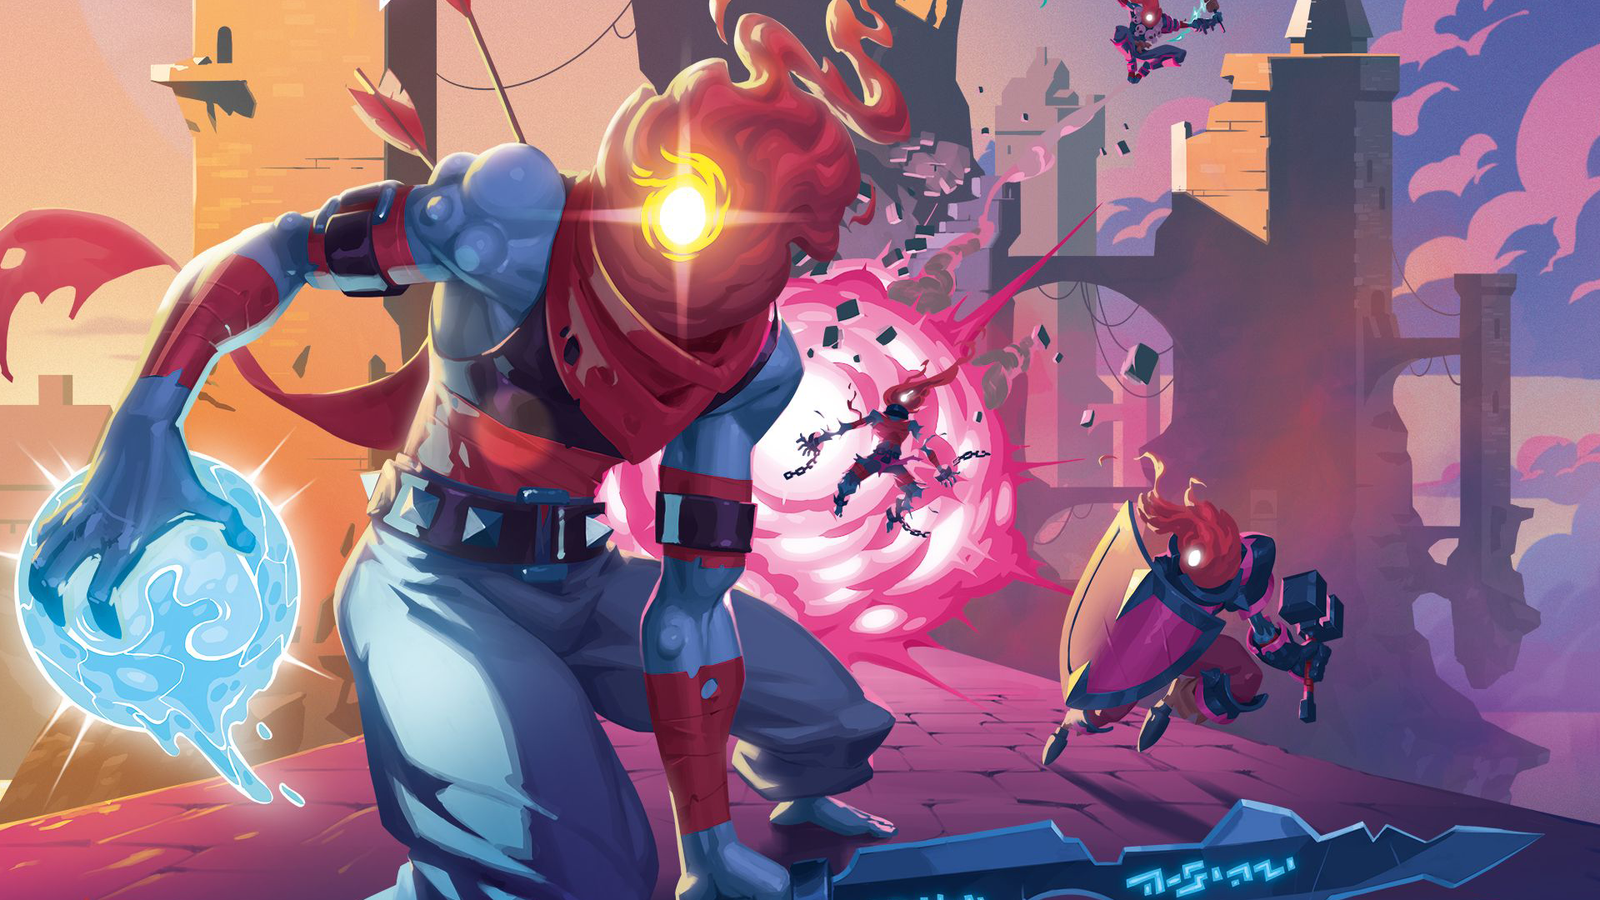 Dead Cells announces Everyone is Here Vol. II update